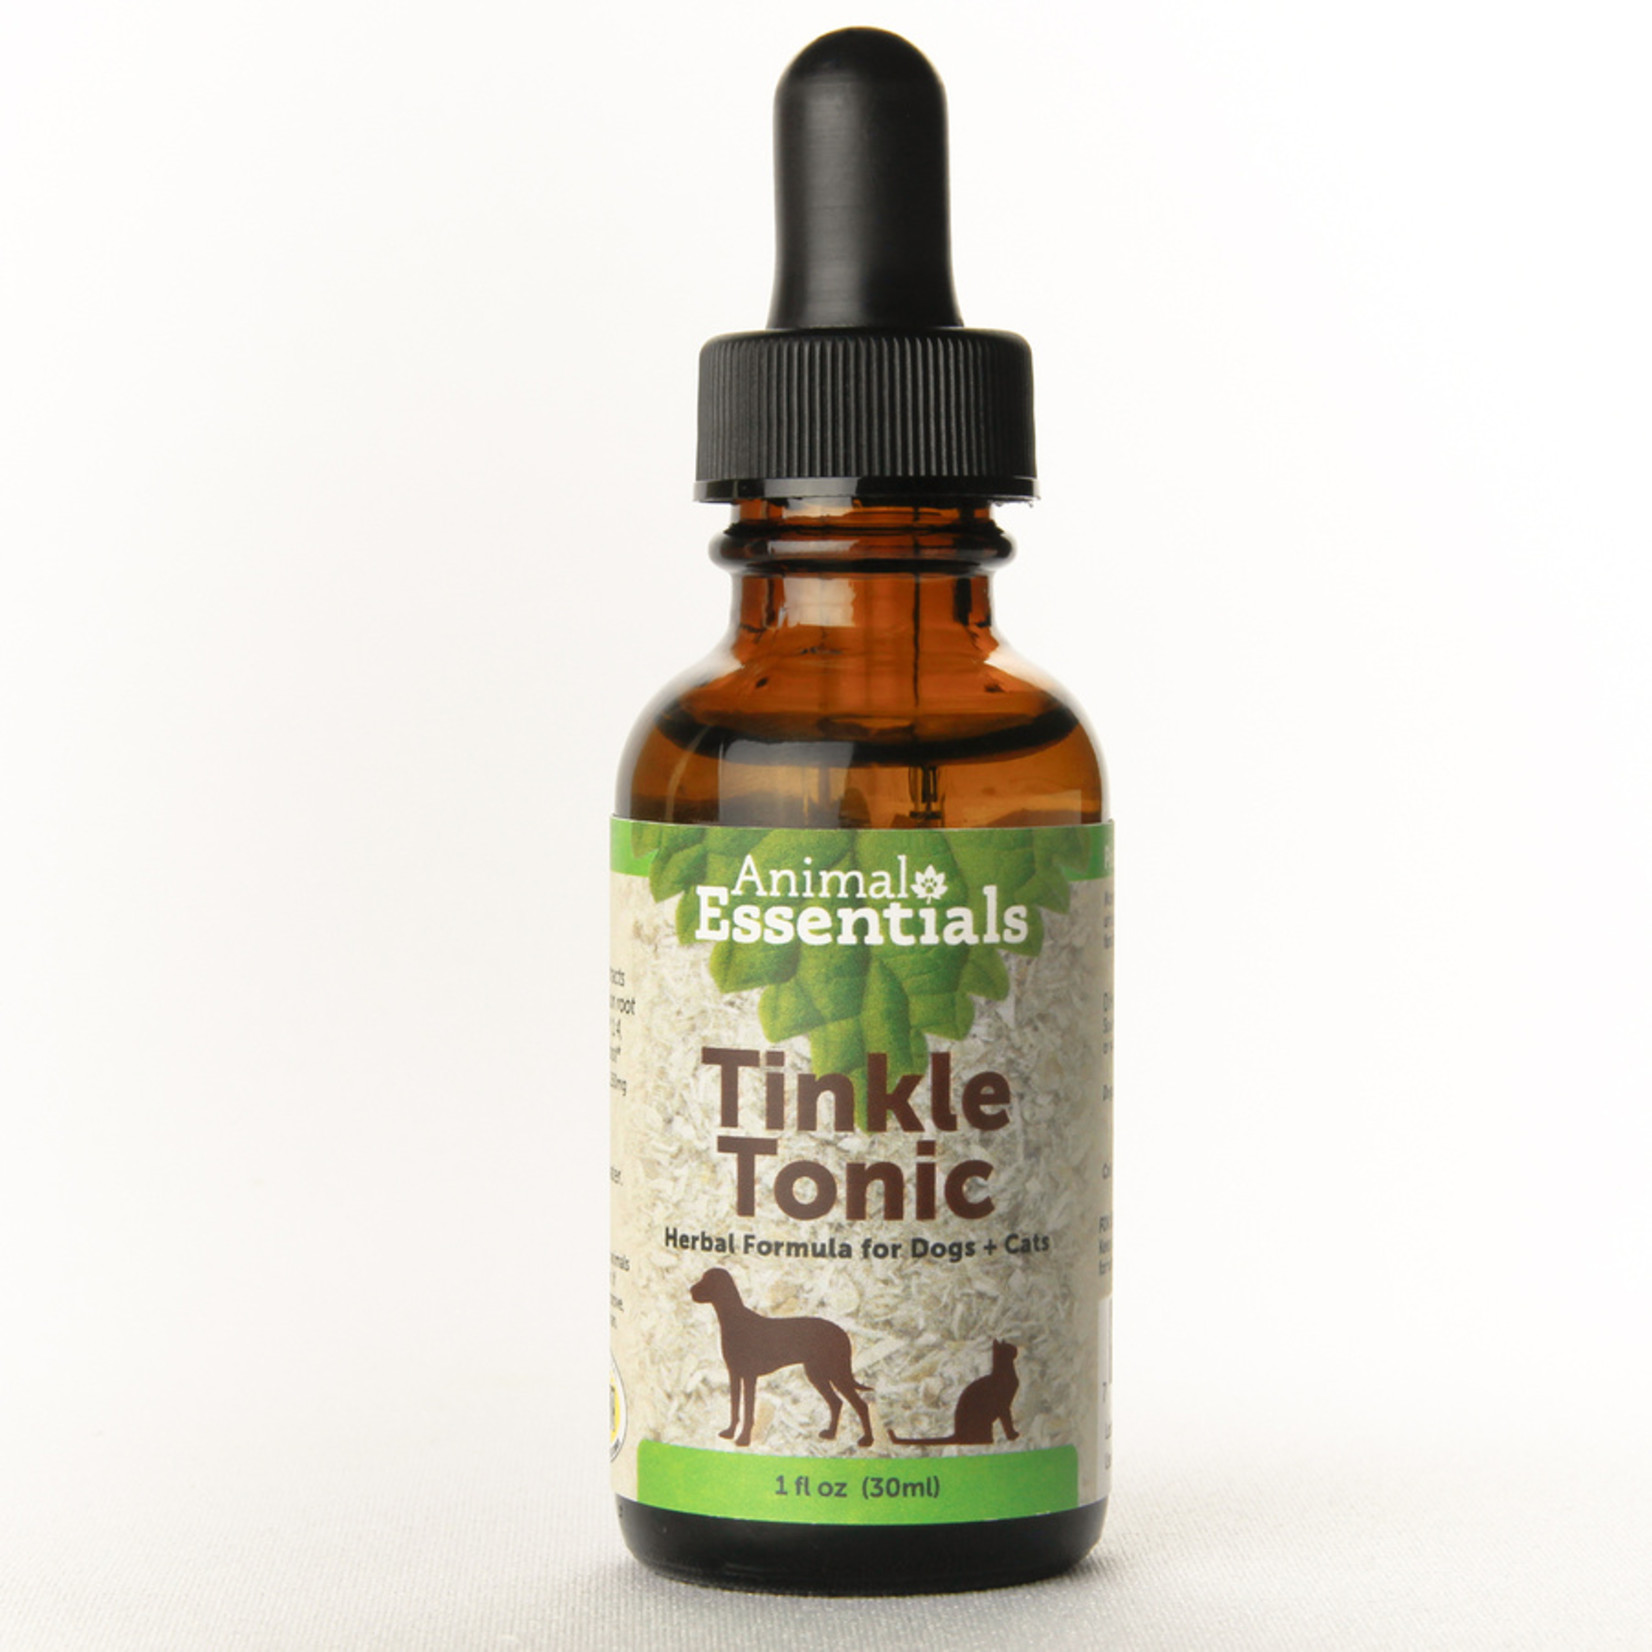 Animal Essentials Animal Essentials Animal Apawthecary Tinkle Tonic Herbal Formula Urinary Support Tincture for Dogs and Cats